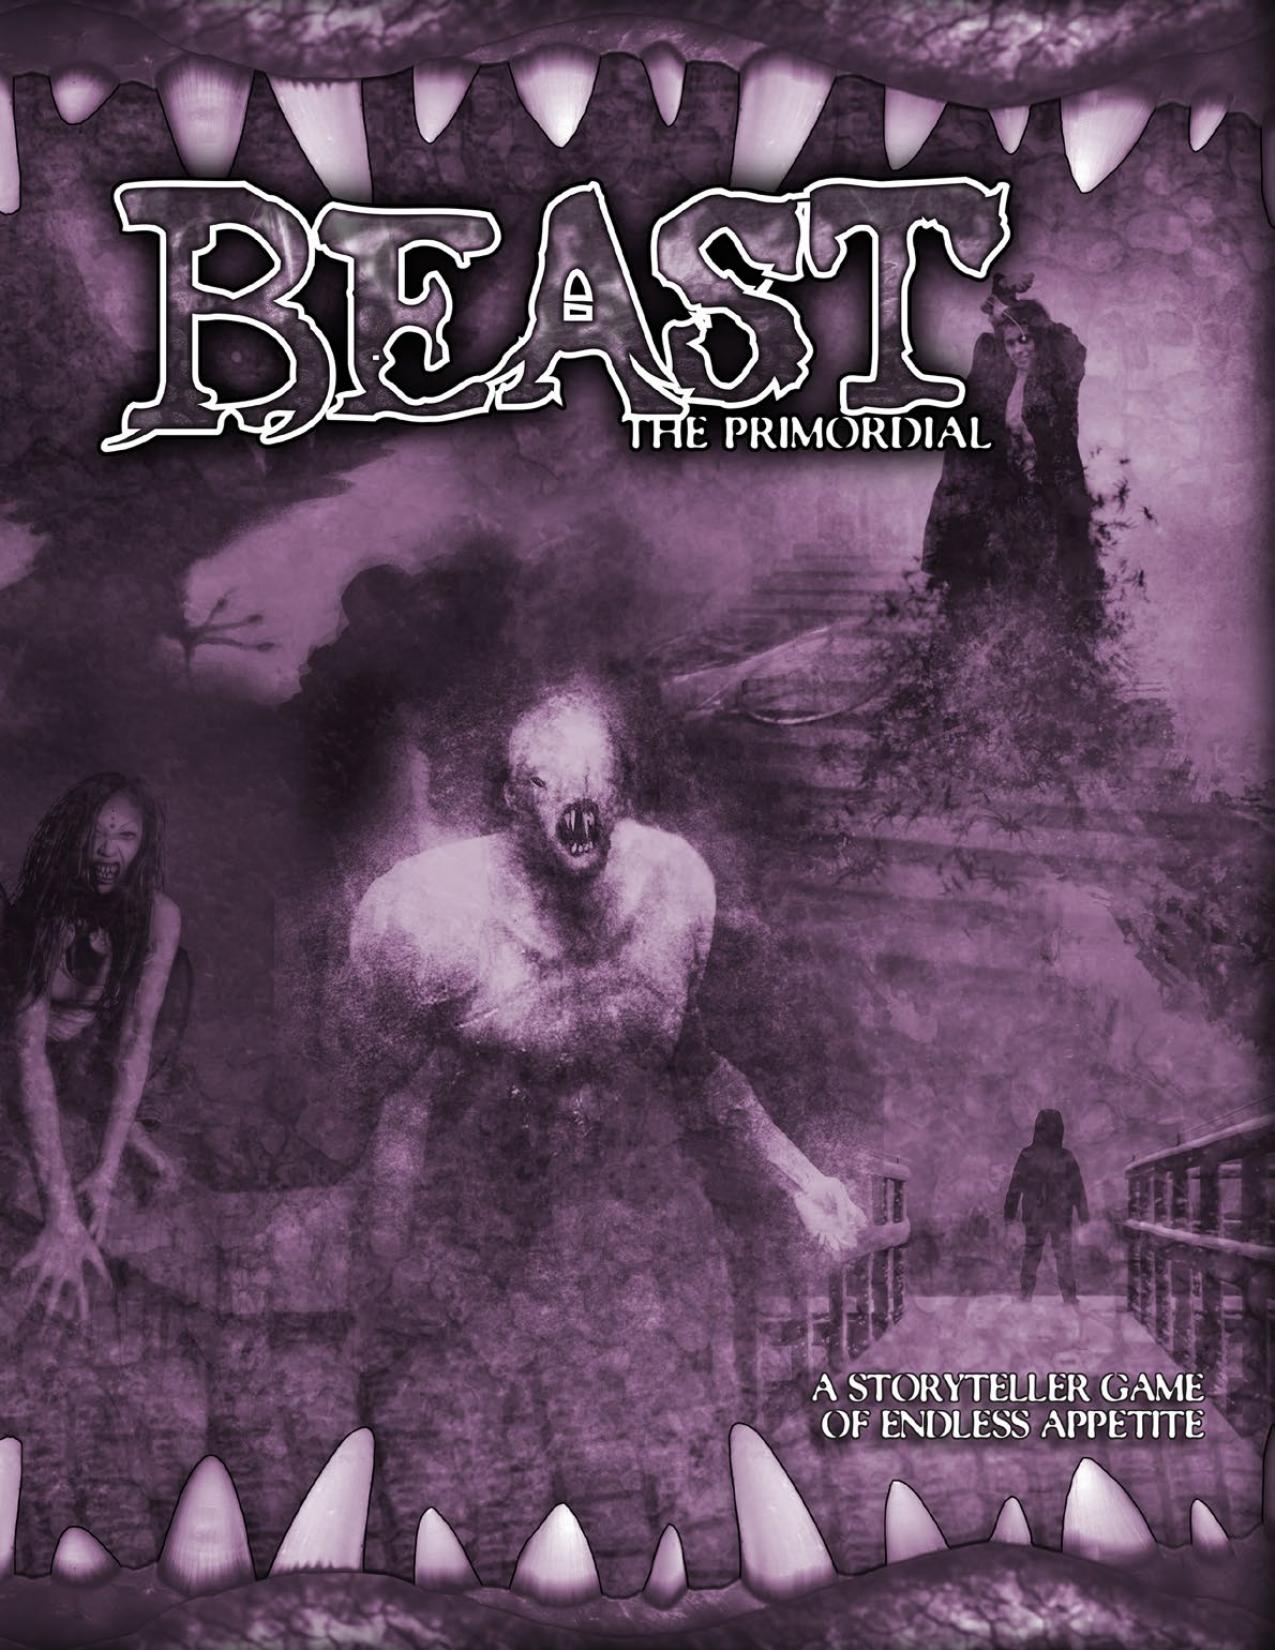 Beast the Primordial